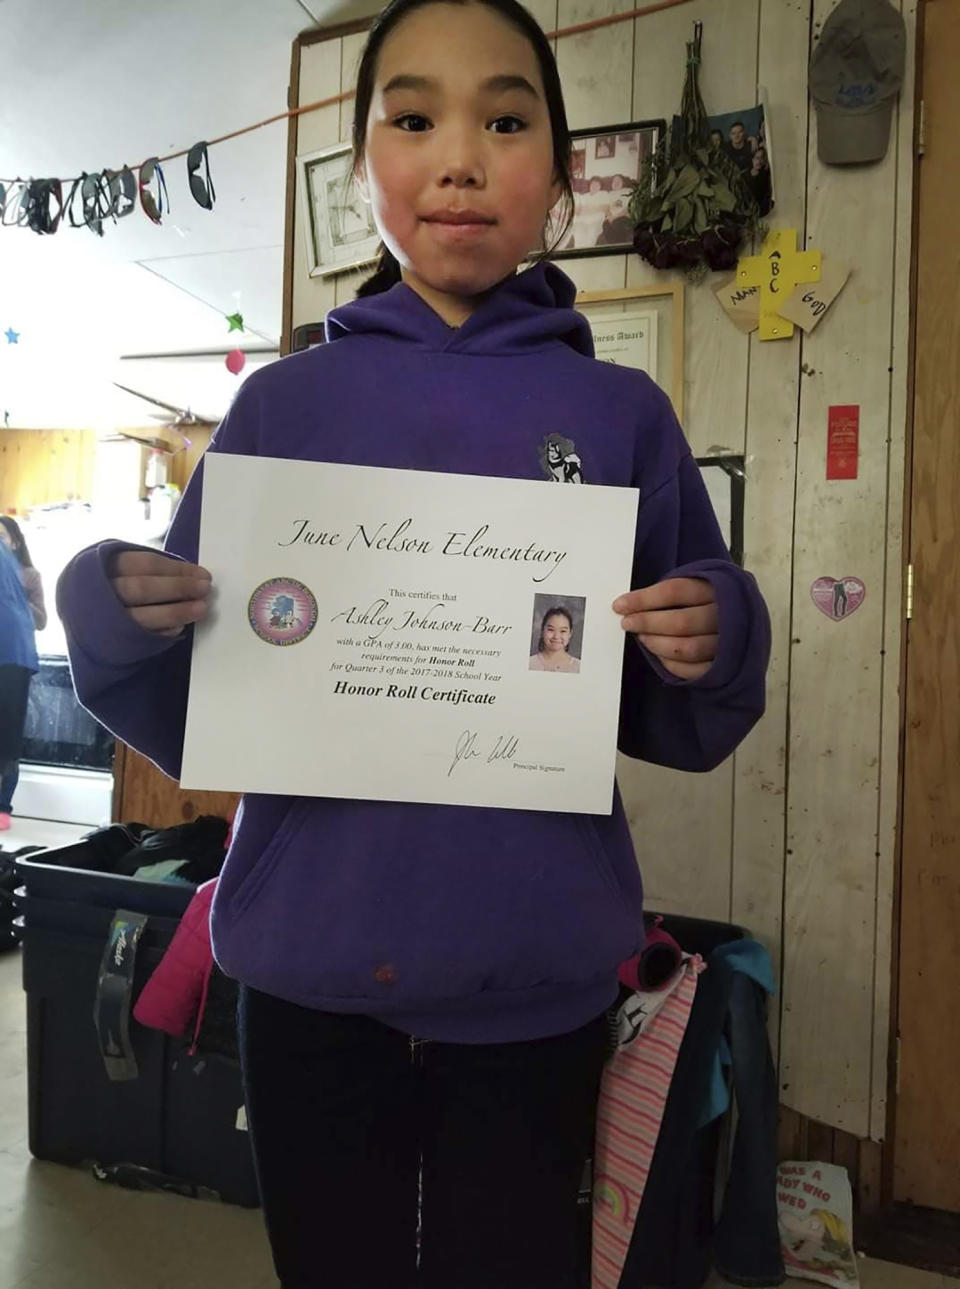 This 2018 photo provided by Scotty Barr shows his daughter Ashley Johnson Barr holding her Honor Roll certificate. Ashley was killed in Kotzebue, Alaska, in September 2018. Peter Wilson, of Kotzebue, Alaska, has pleaded guilty to first-degree murder and sexual abuse of a minor in Ashley's death, and will be sentenced Sept. 21, 2021, in Kotzebue. (Courtesy of Scotty Barr via AP)